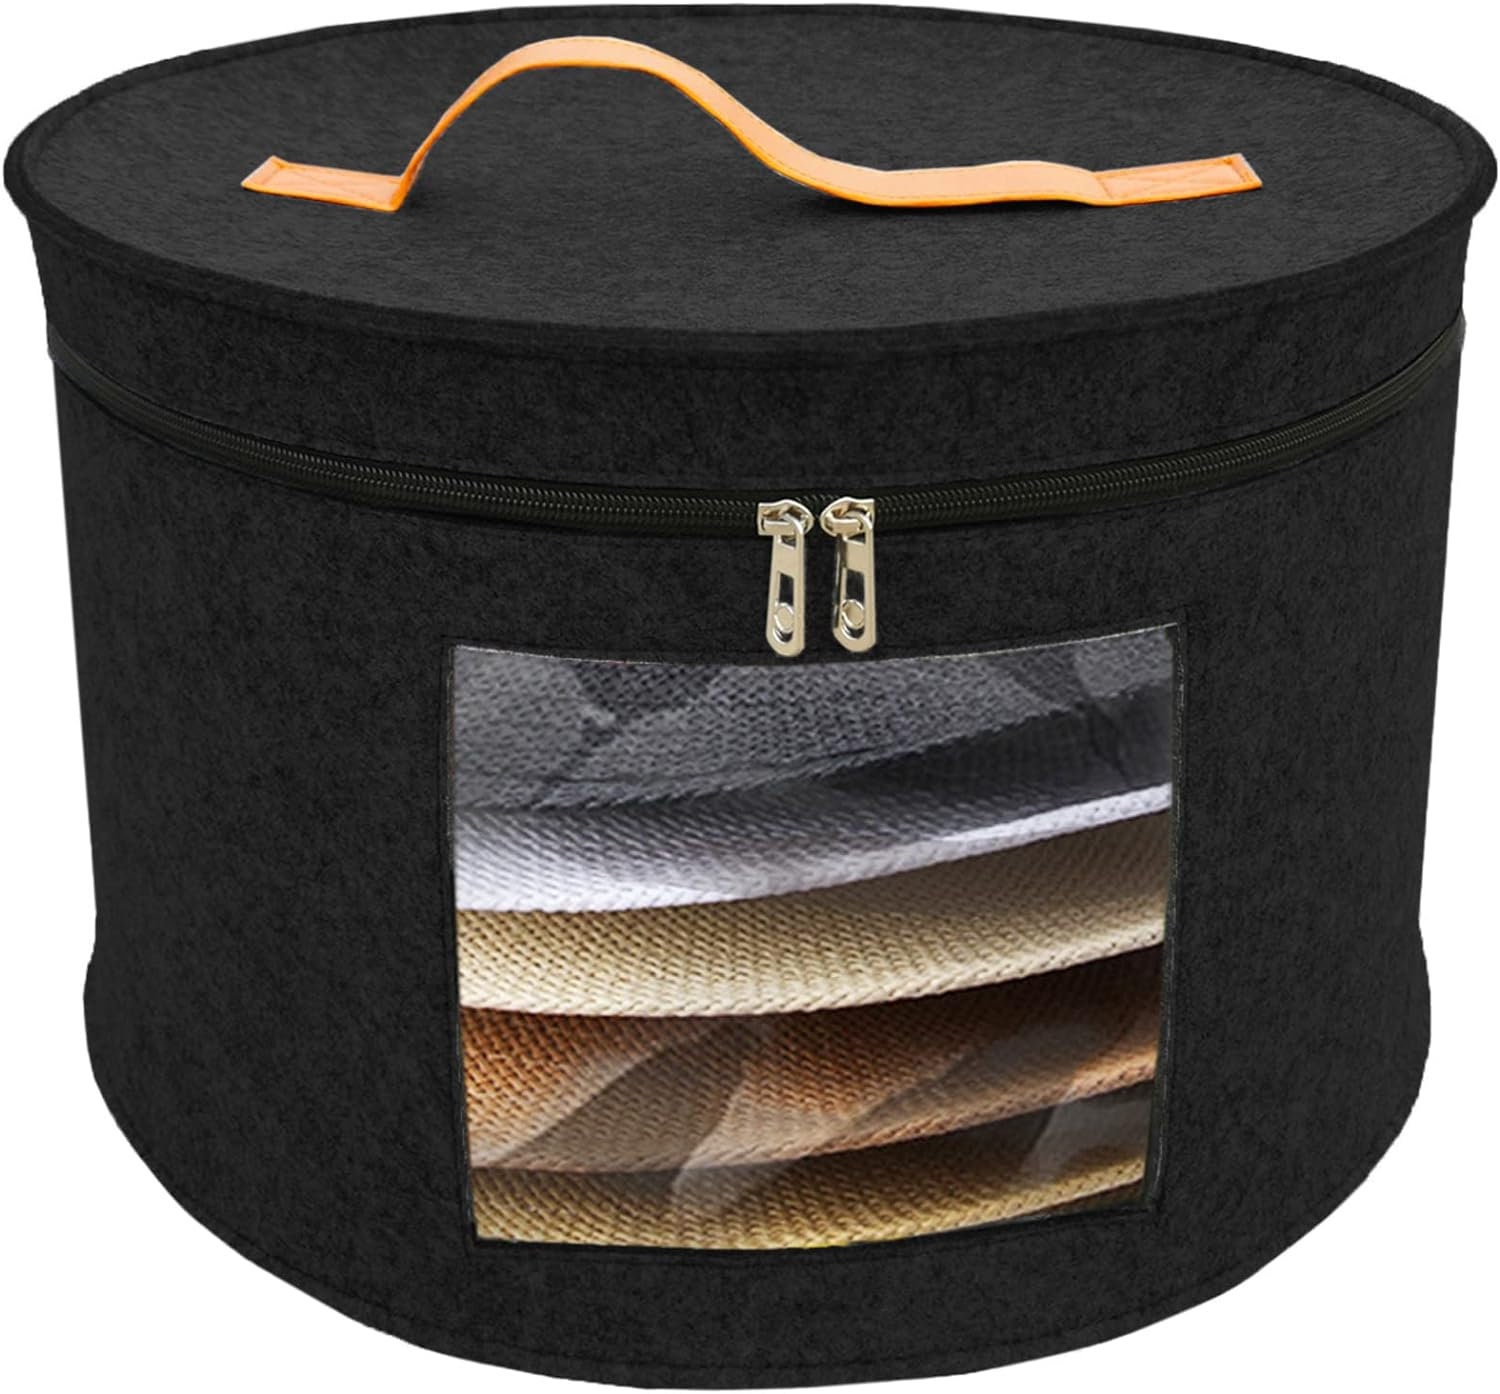 Hat Boxes for Women Storage & Men-foldable Hat Storage Boxes-large Capacity  Box With Lids for Travel With Dustproof Lid Toy Storagedark Grey 